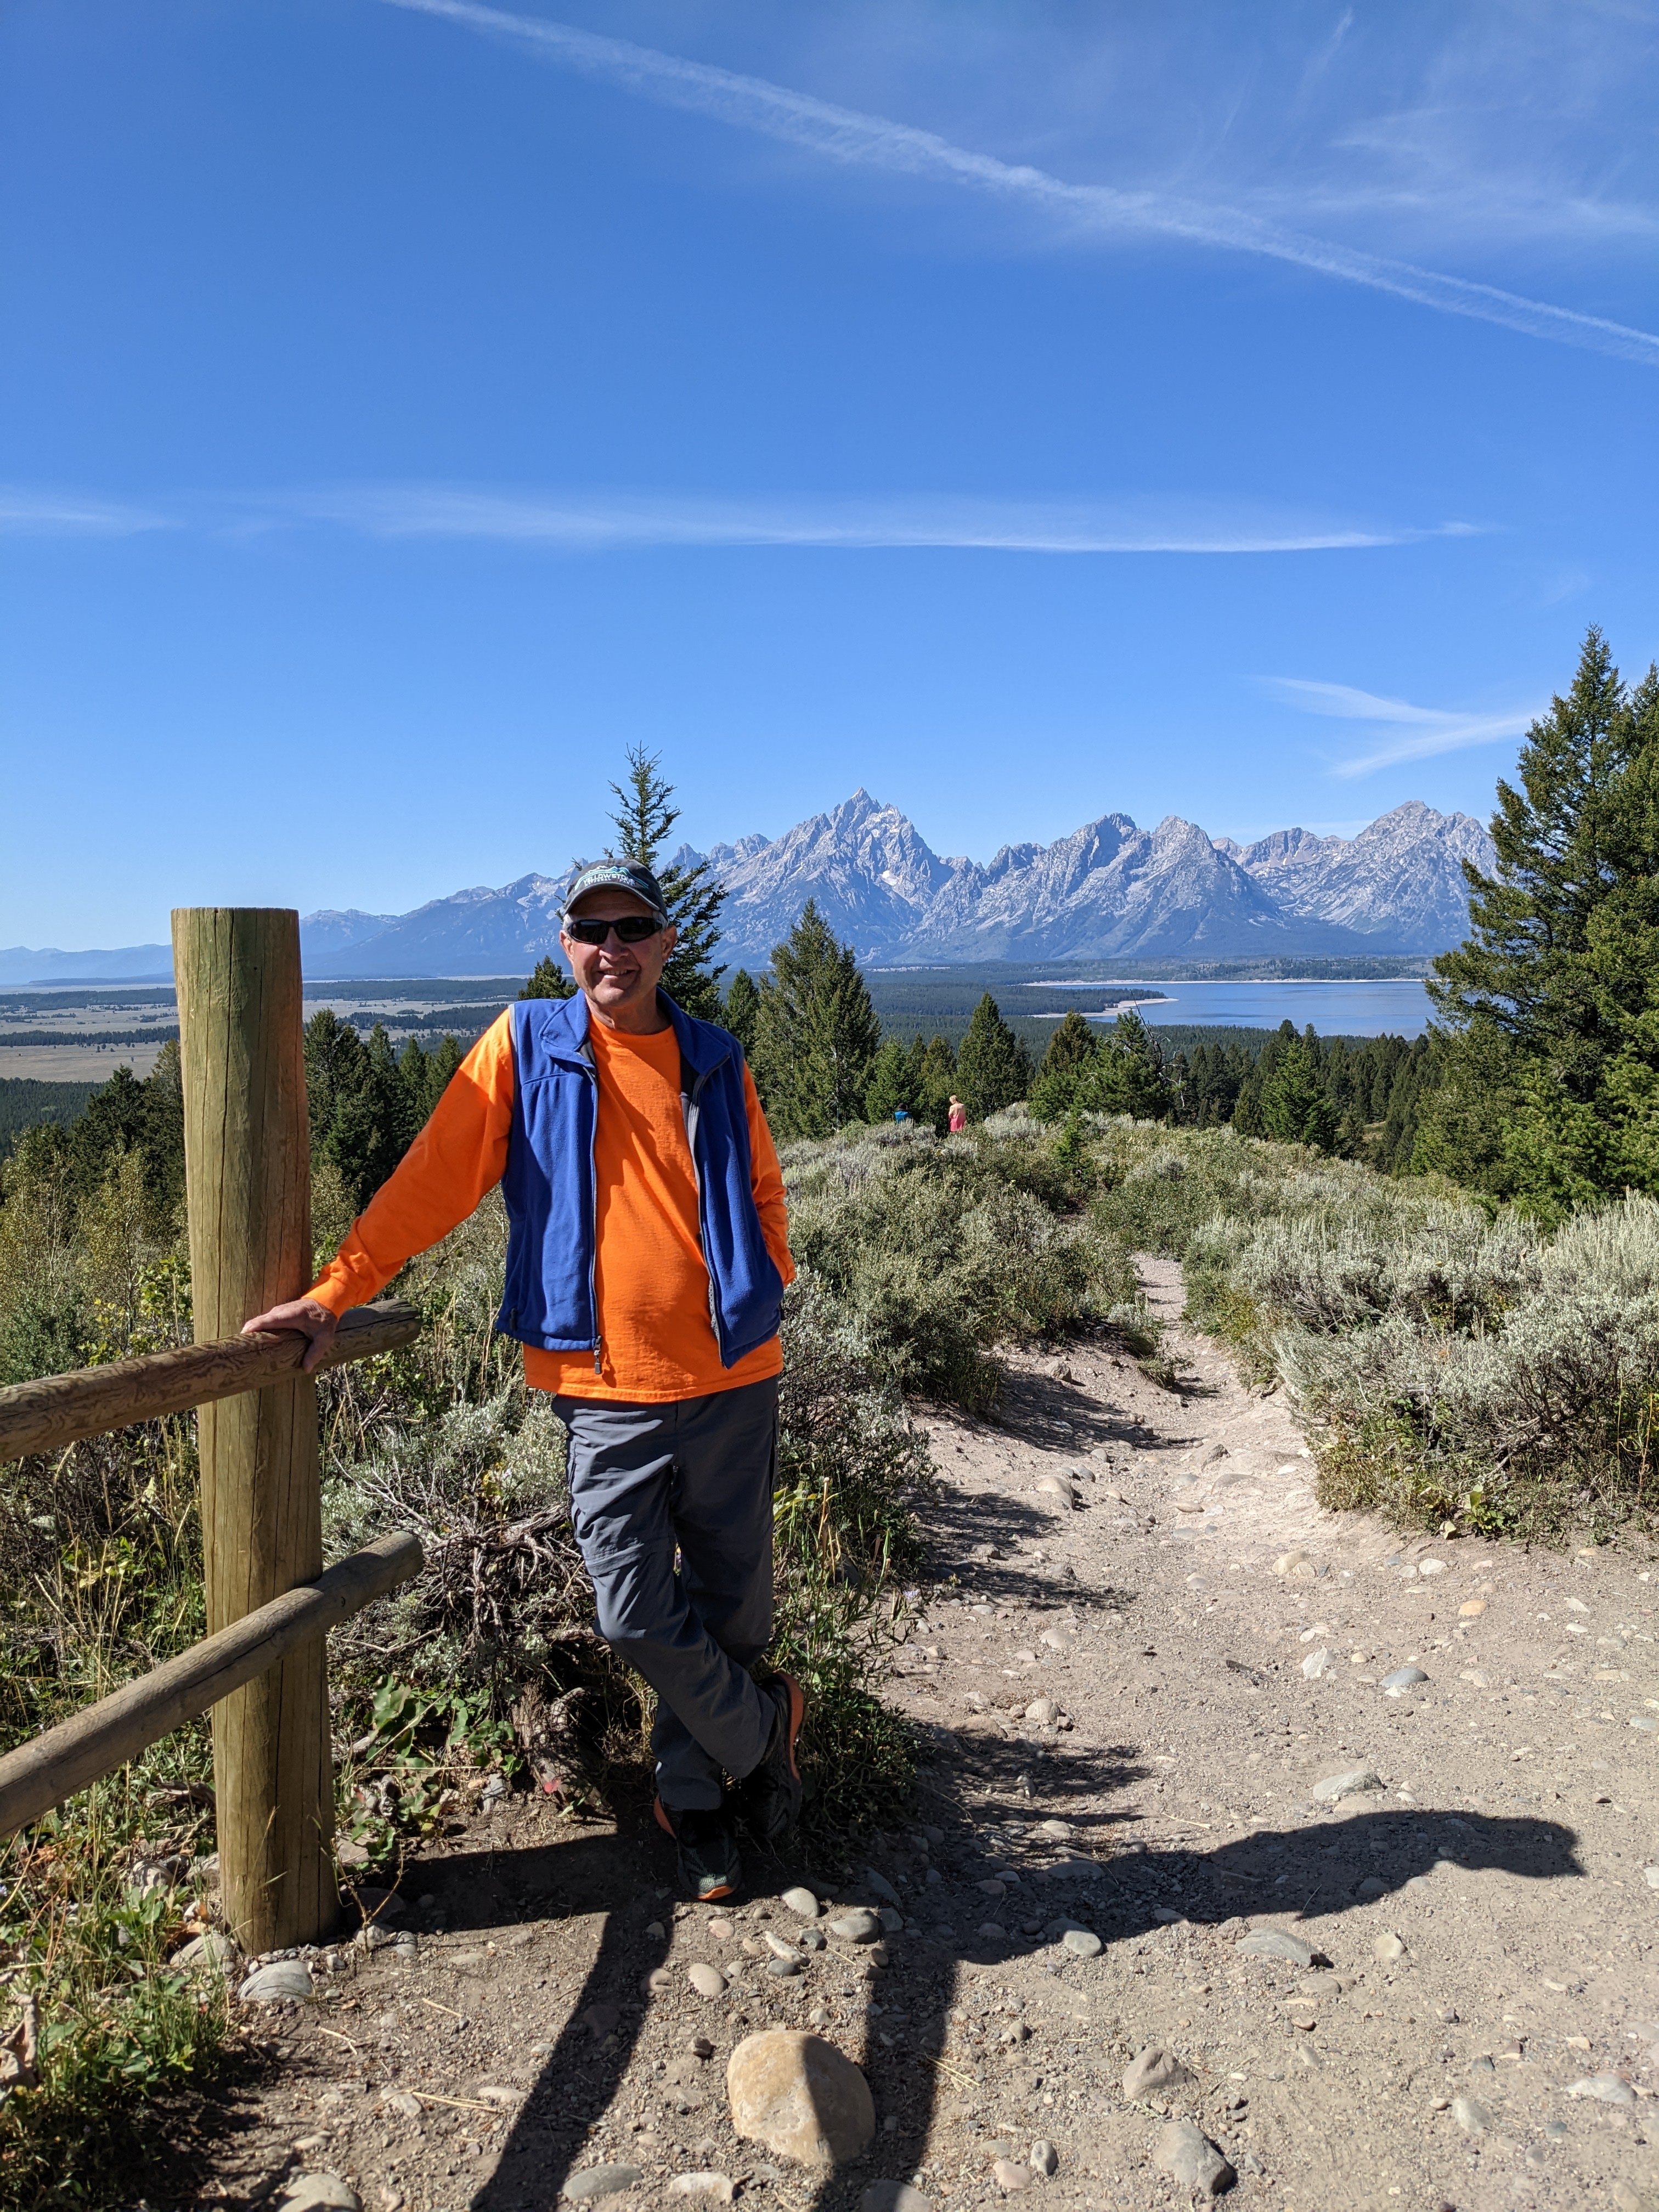 A man leans on a fence in front of a mountain range.